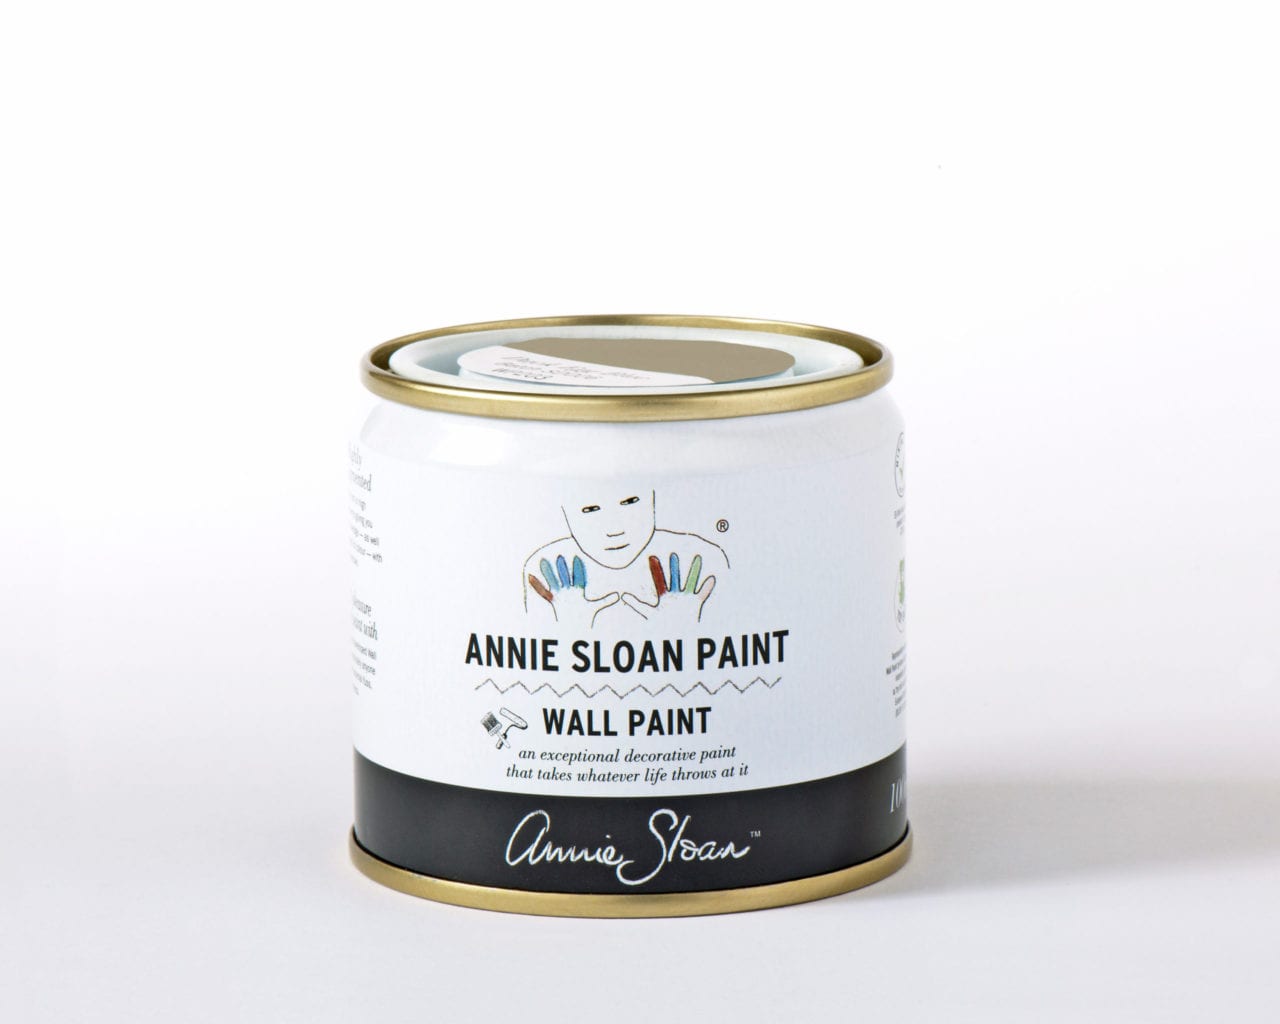 1641470453French-Linen-Annie-Sloan-Wall-Paint-100-ml-tin-scaled-1.jpg